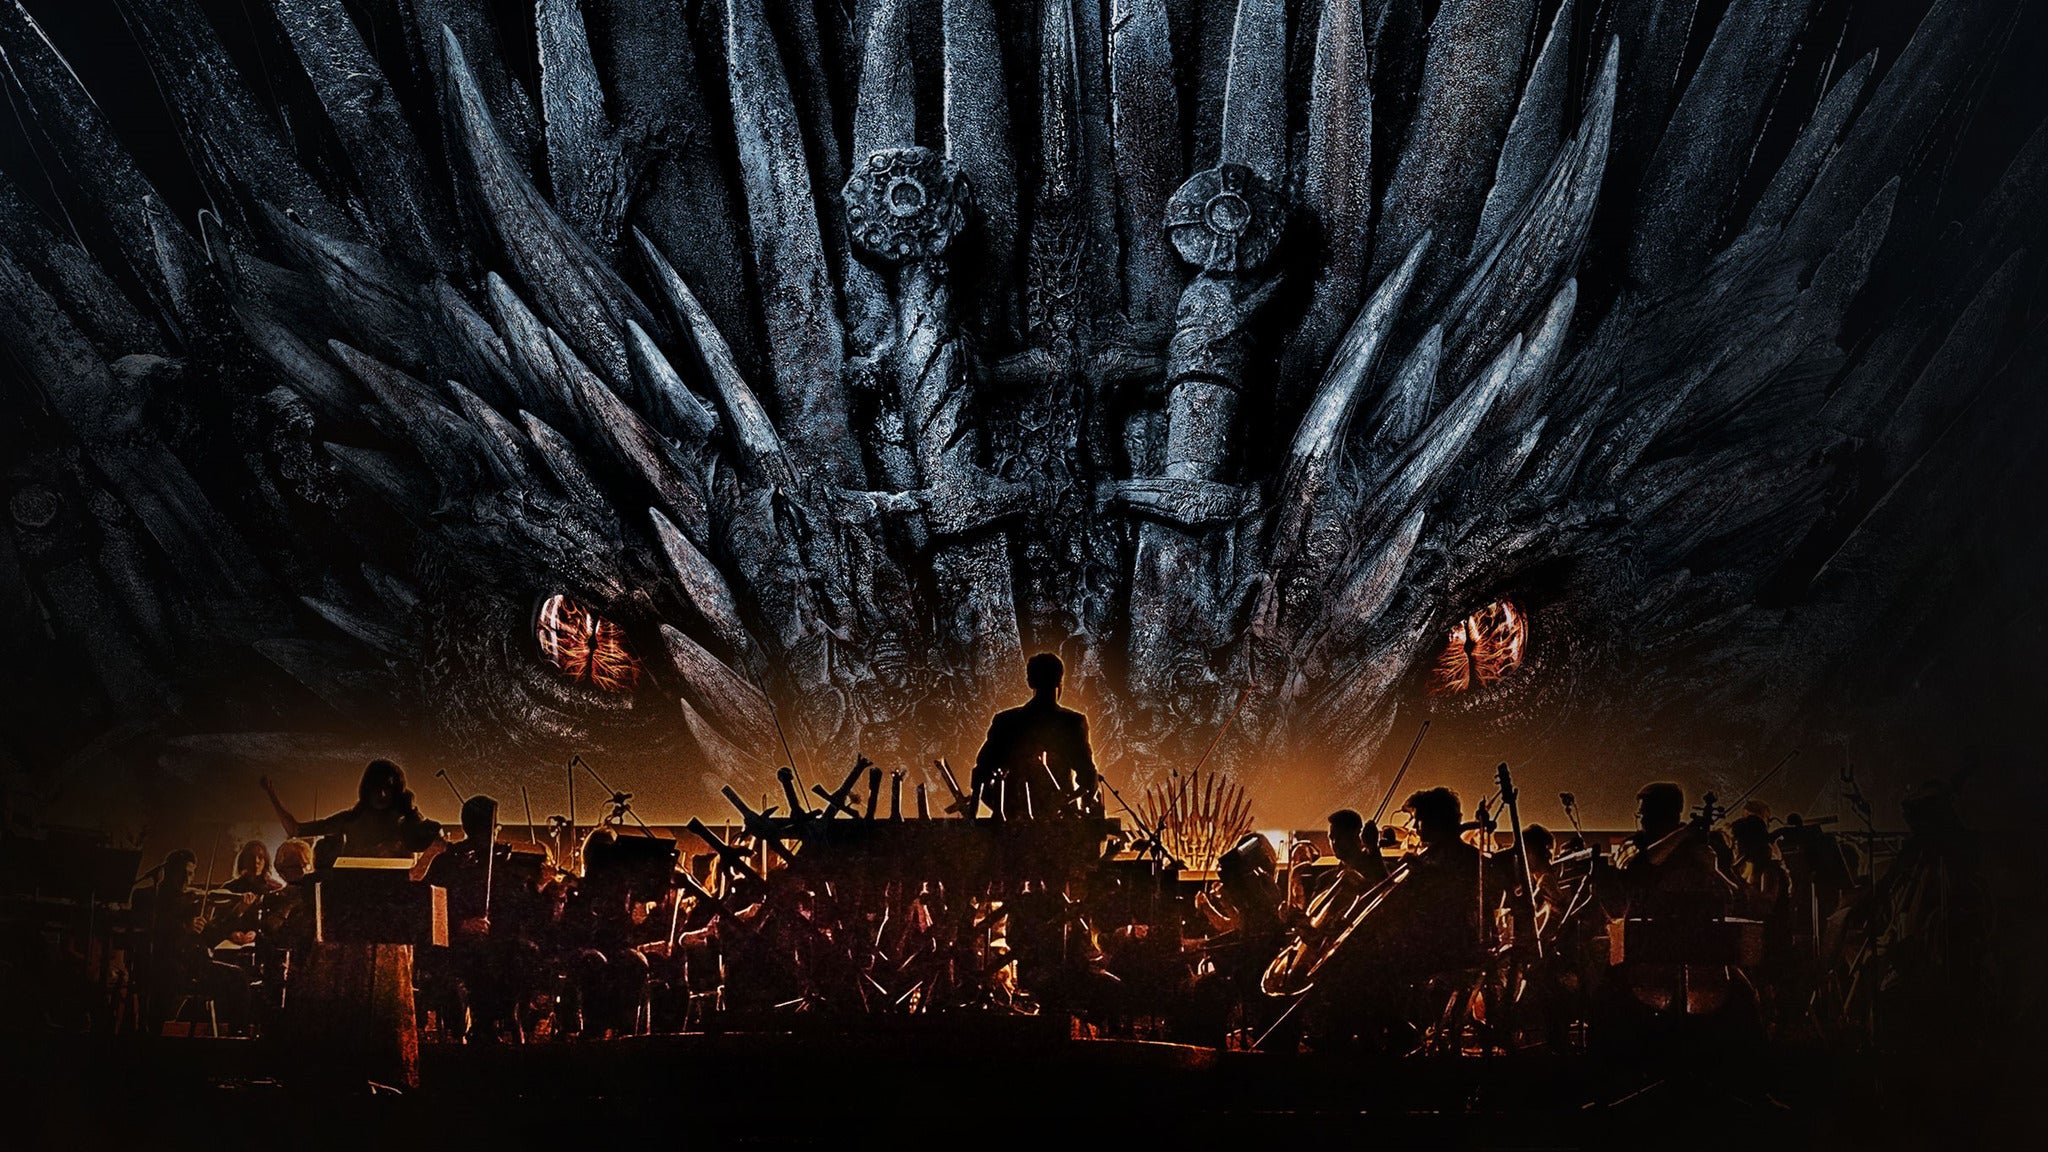 Game Of Thrones Live Concert Experience - Music By Ramin Djawadi in West Palm Beach promo photo for CITI Cardmember Preferred presale offer code